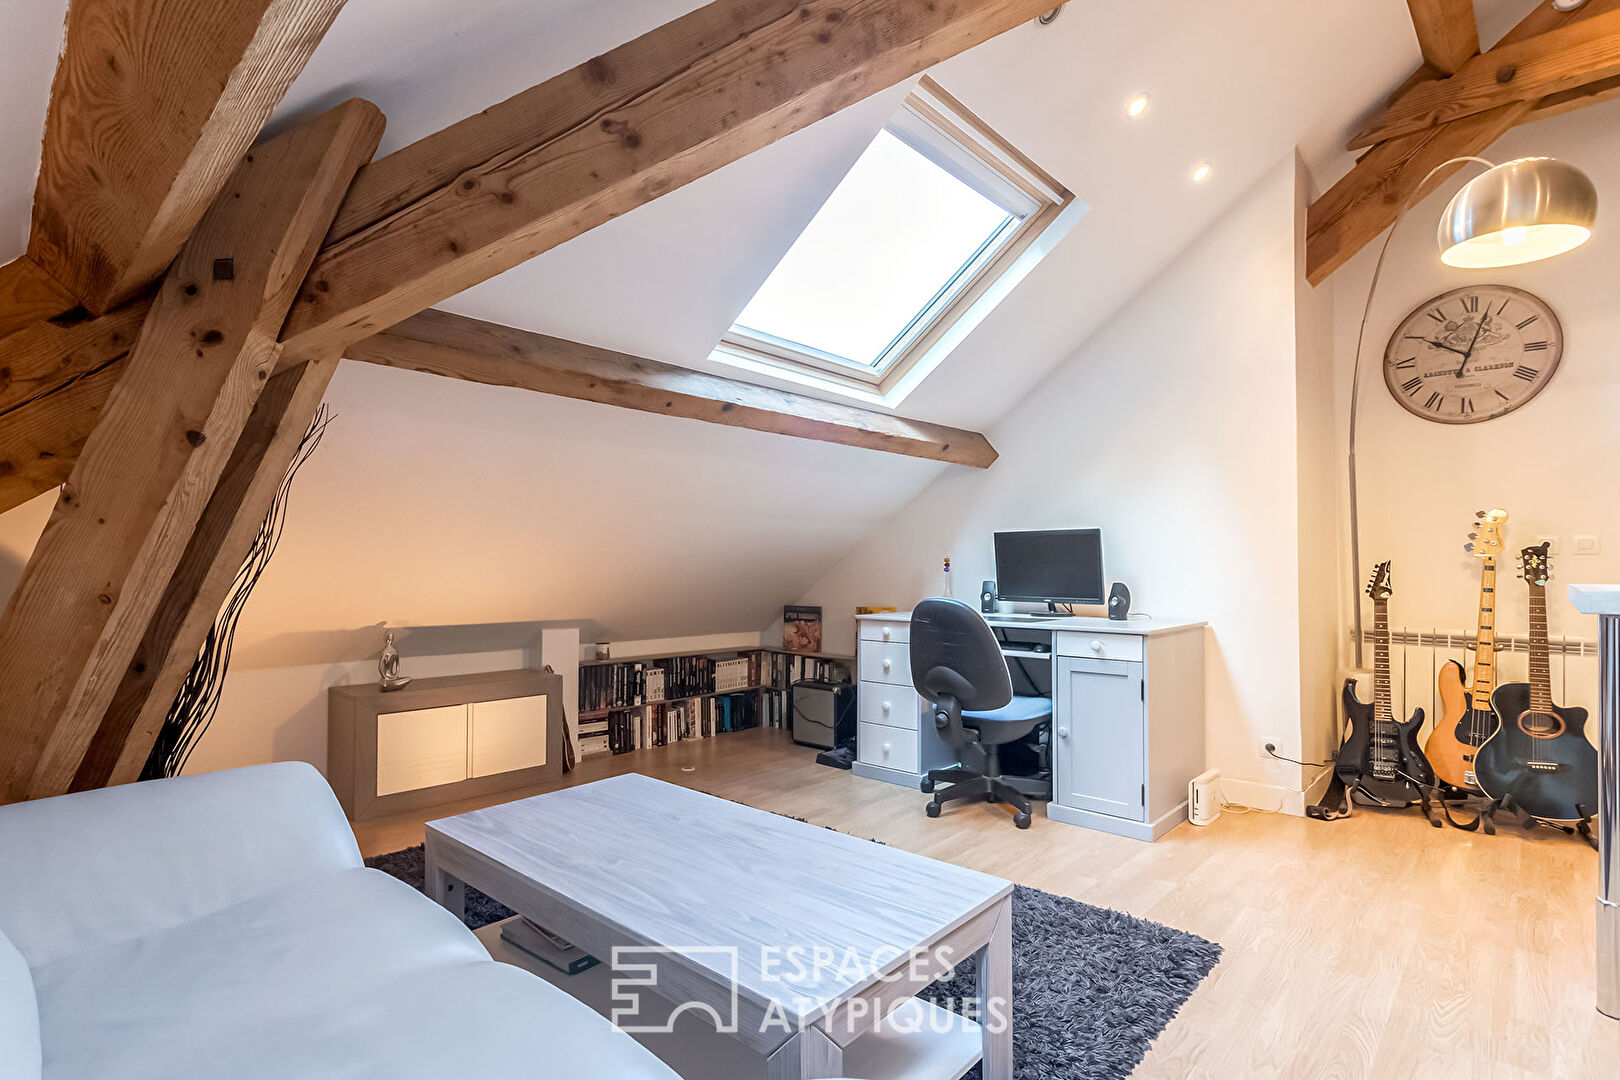 Charming attic apartment in the city center